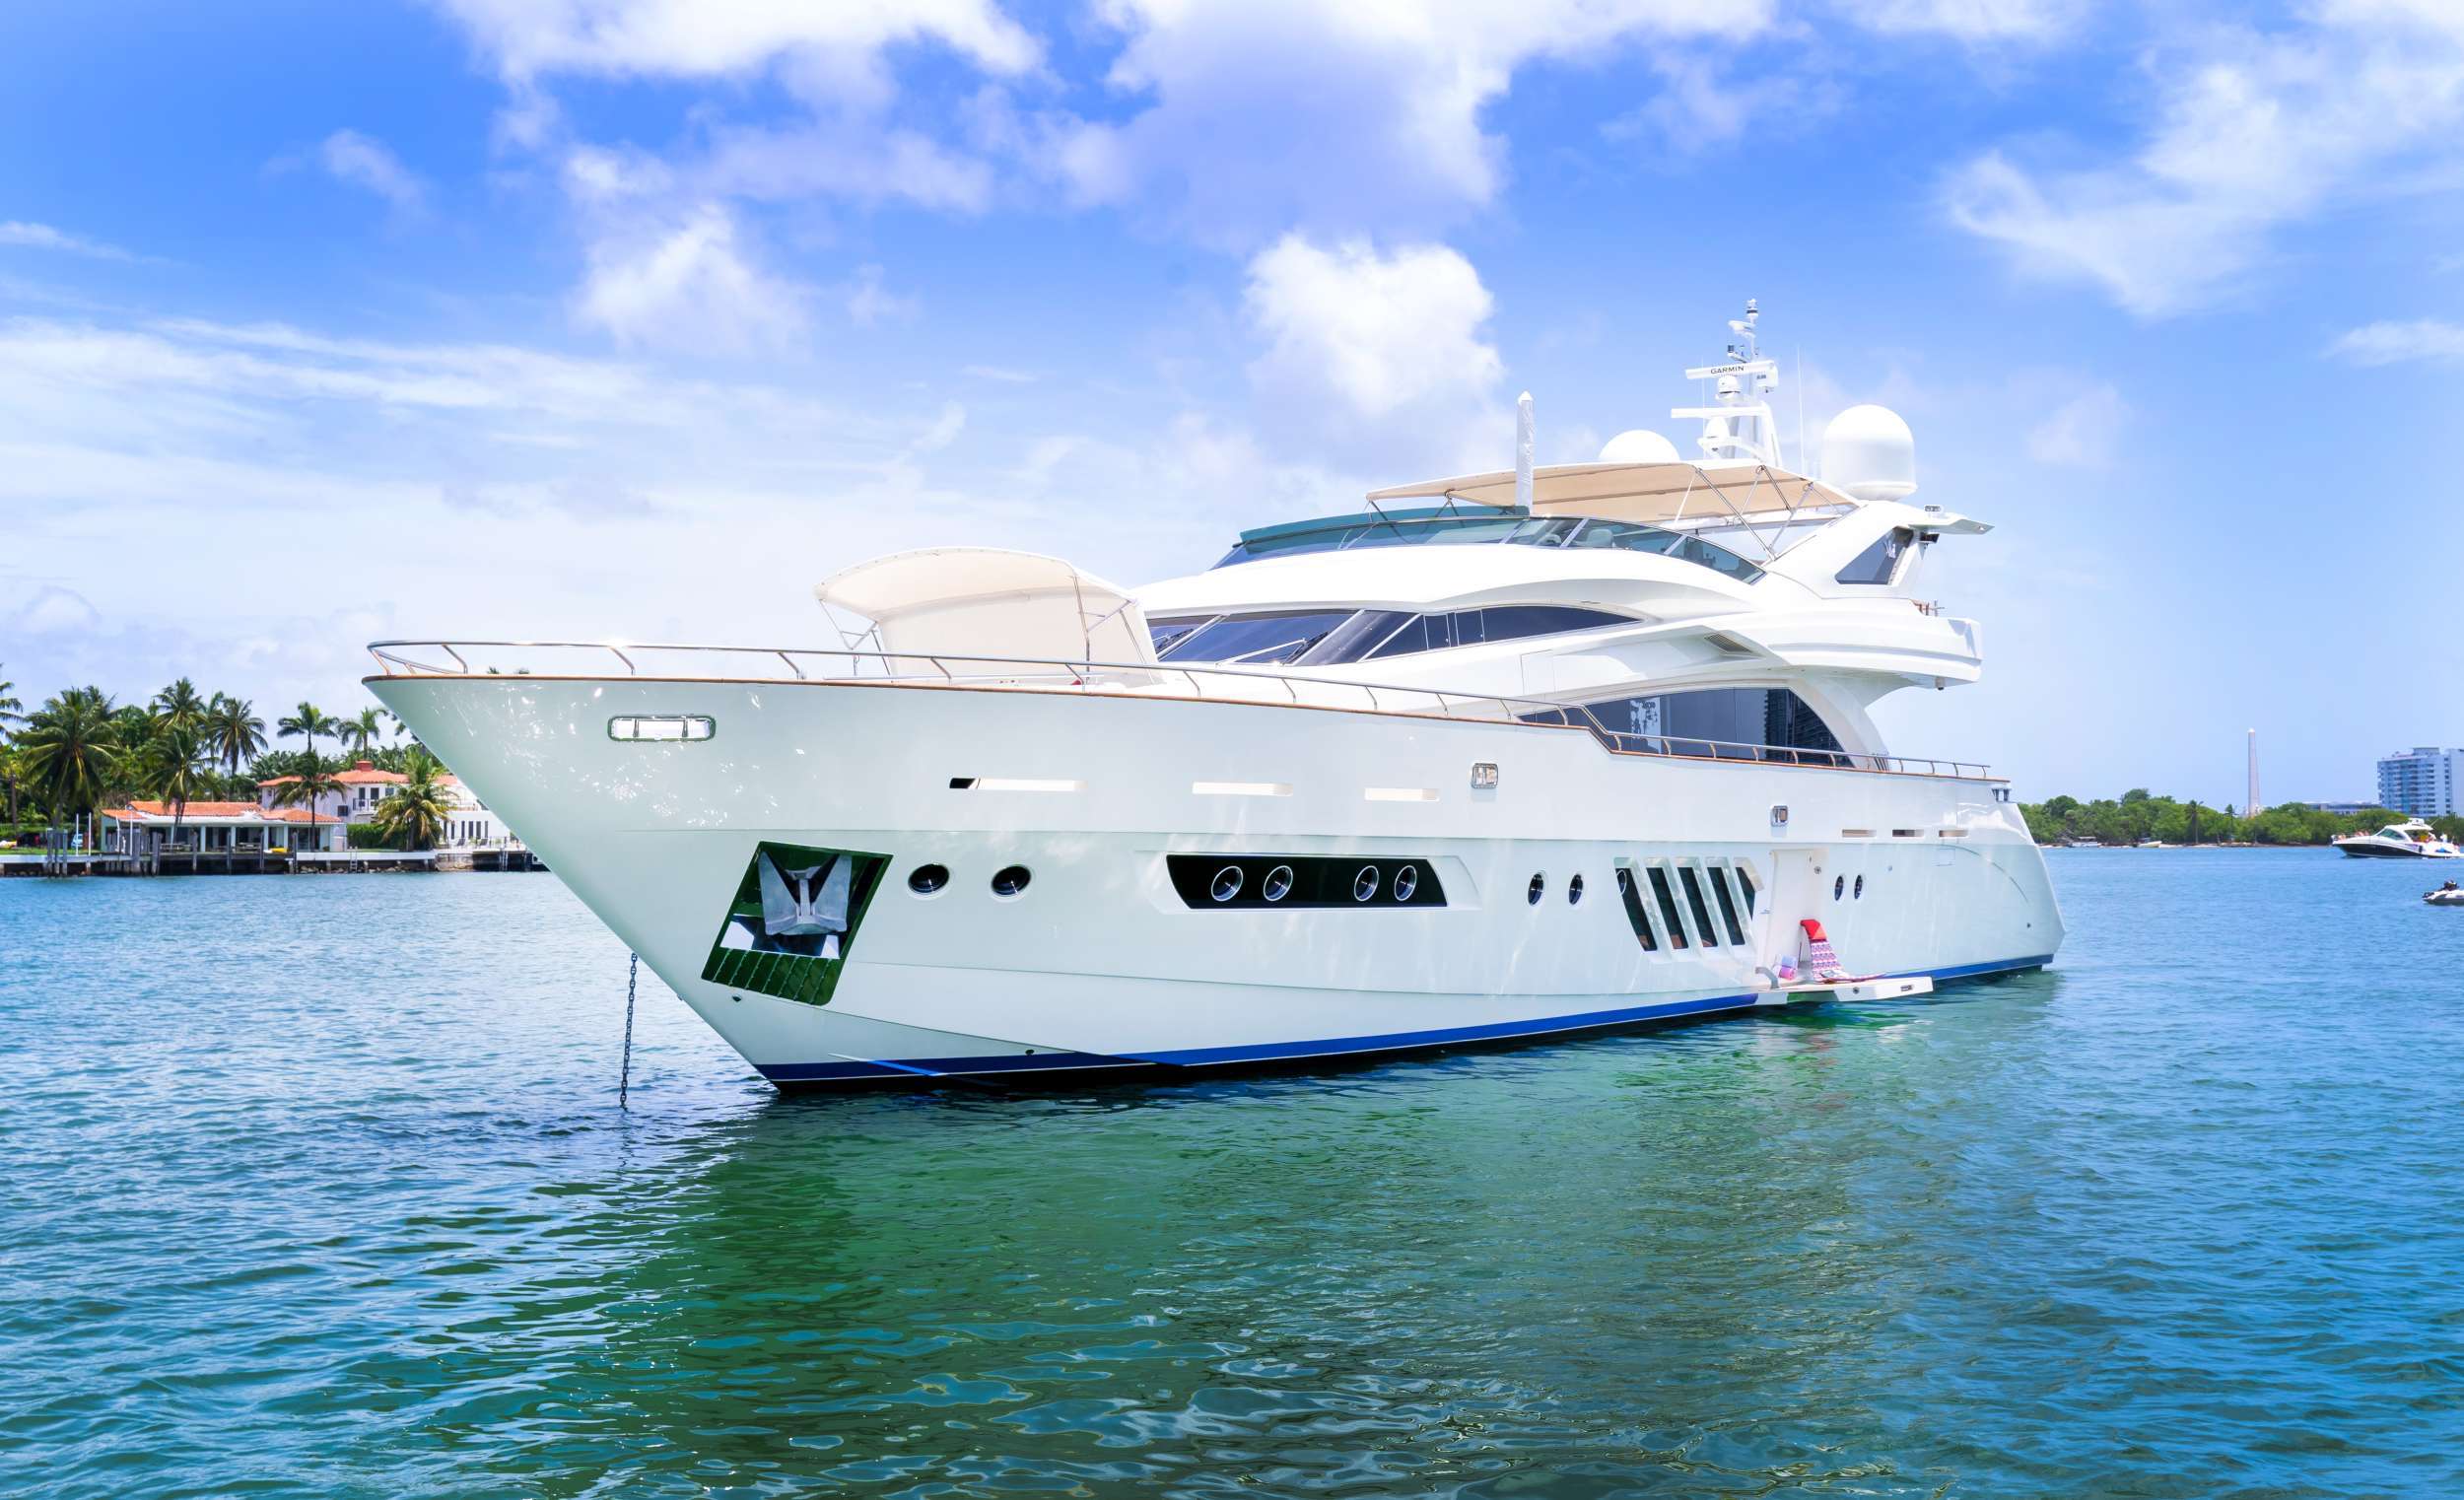 95 DOMINATOR - Yacht Charter Annapolis & Boat hire in US East Coast & Bahamas 1